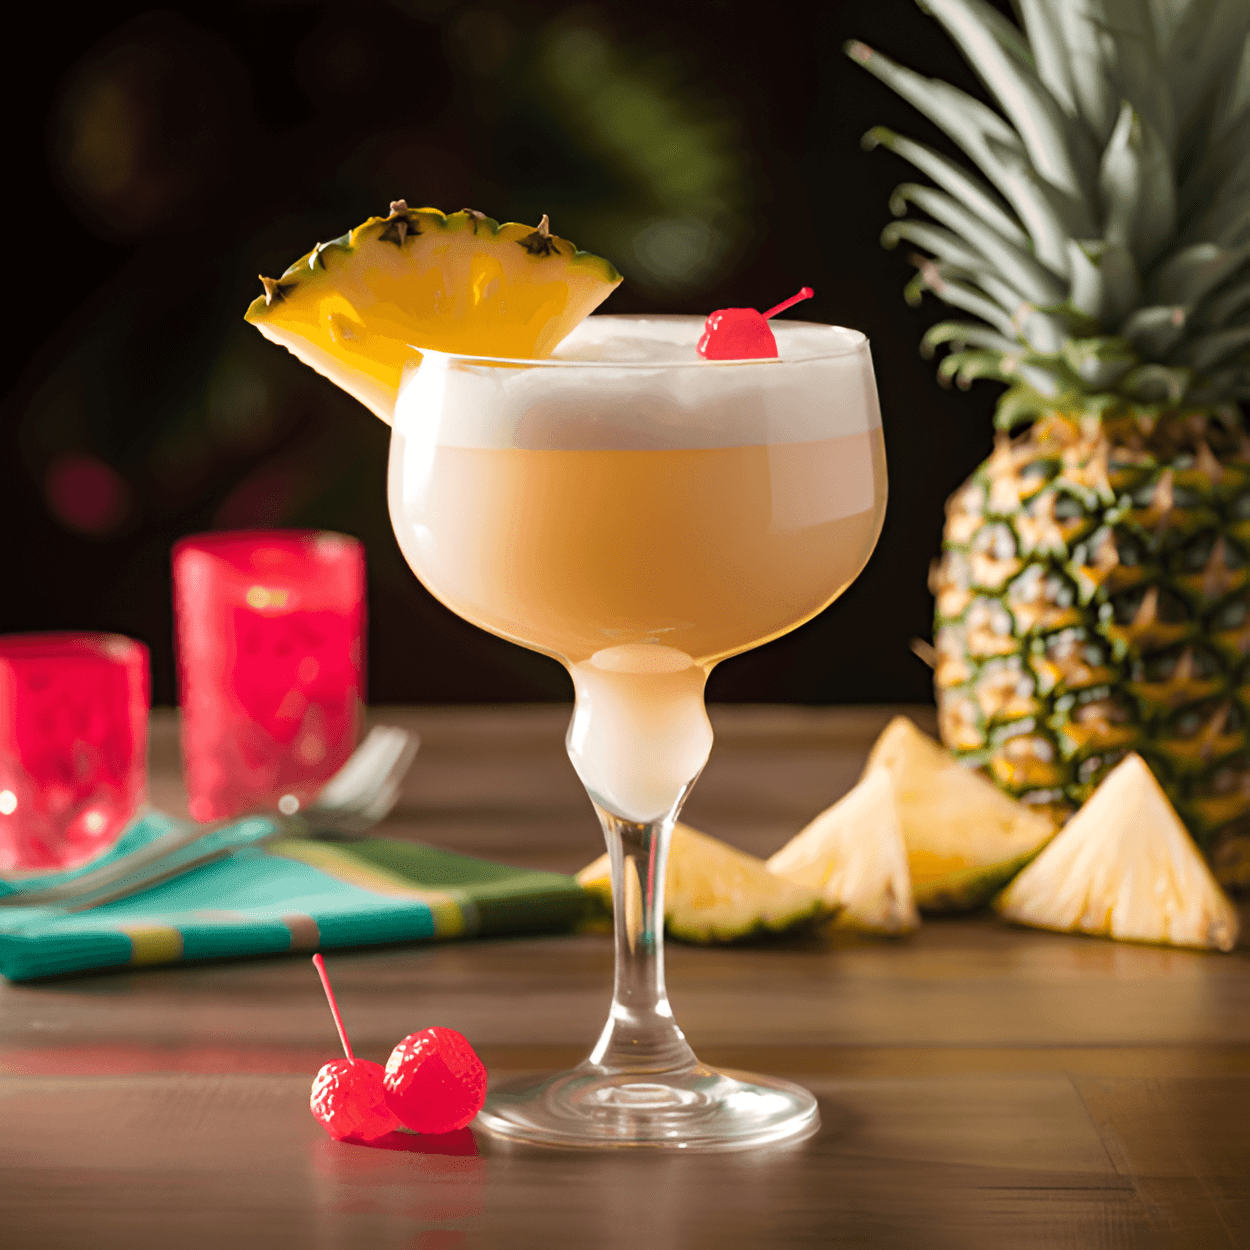 Piñata Cocktail Recipe - The Piñata cocktail is a sweet, fruity drink with a tropical twist. It has a strong pineapple flavor, balanced by the tartness of the lime and the smooth, creamy coconut. The rum adds a warming kick, making this a well-rounded, satisfying cocktail.